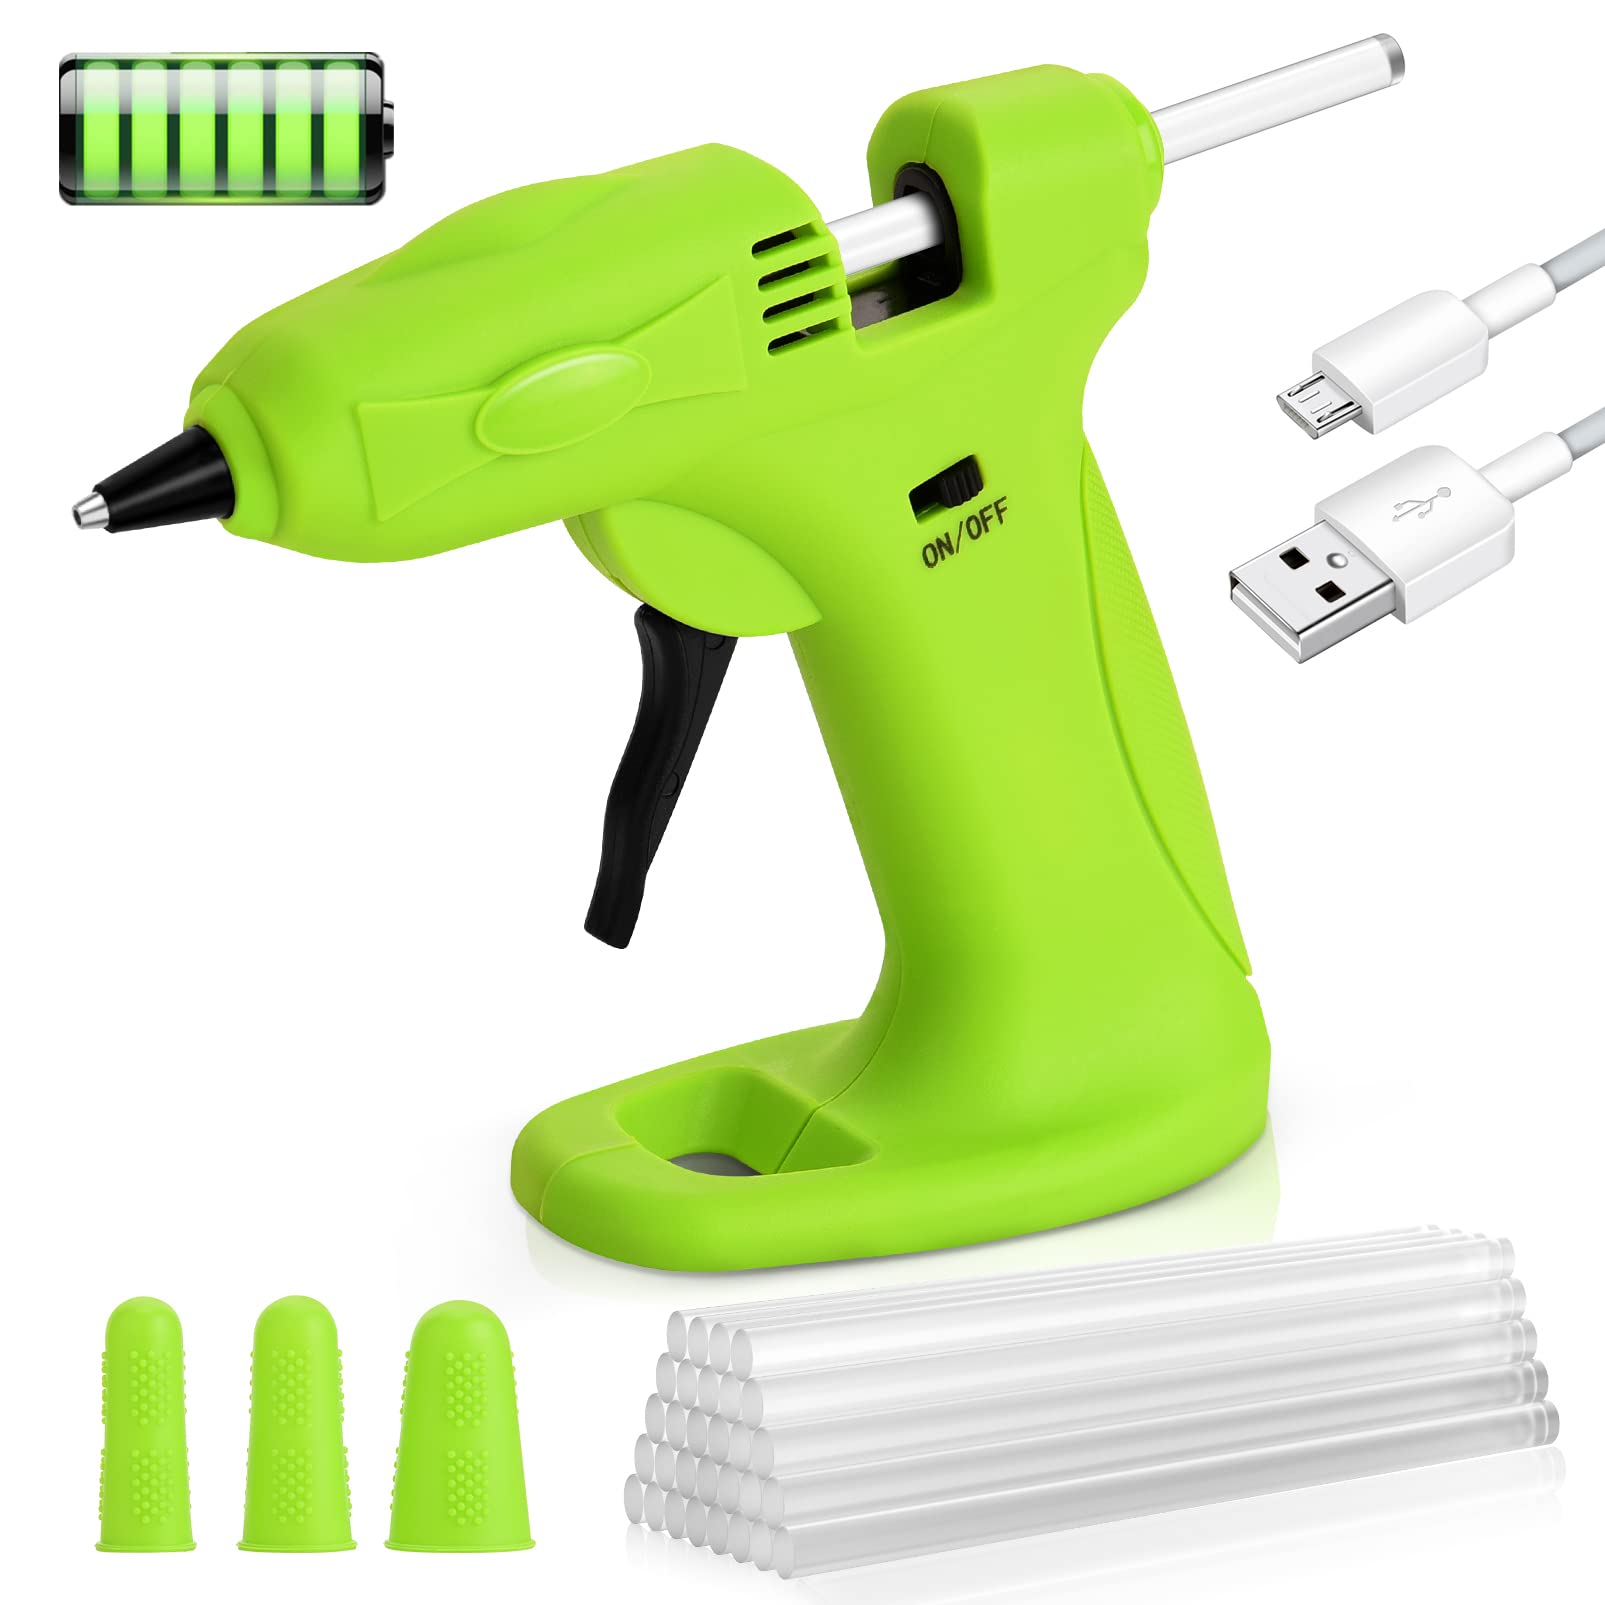 Cordless Hot Glue Gun, 2900 mAh Wireless USB Chargeable Battery Charged  with 30 Glue Sticks For Craft, DIY, Art, Gift - AliExpress